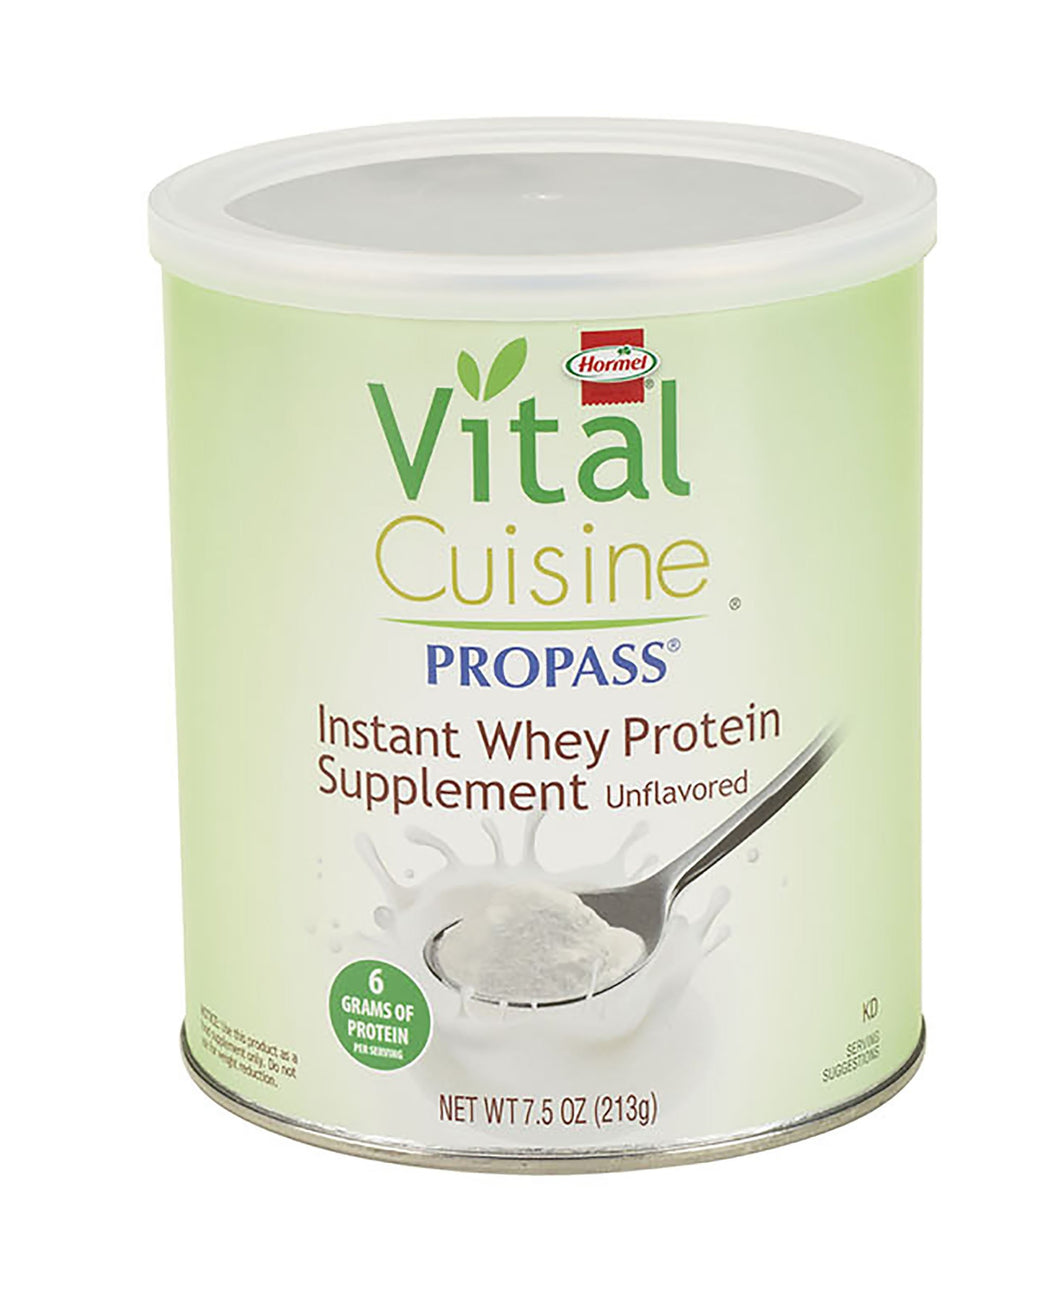  Oral Protein Supplement Vital Cuisine® ProPass® Whey Protein Unflavored Powder 7.5 oz. Can 